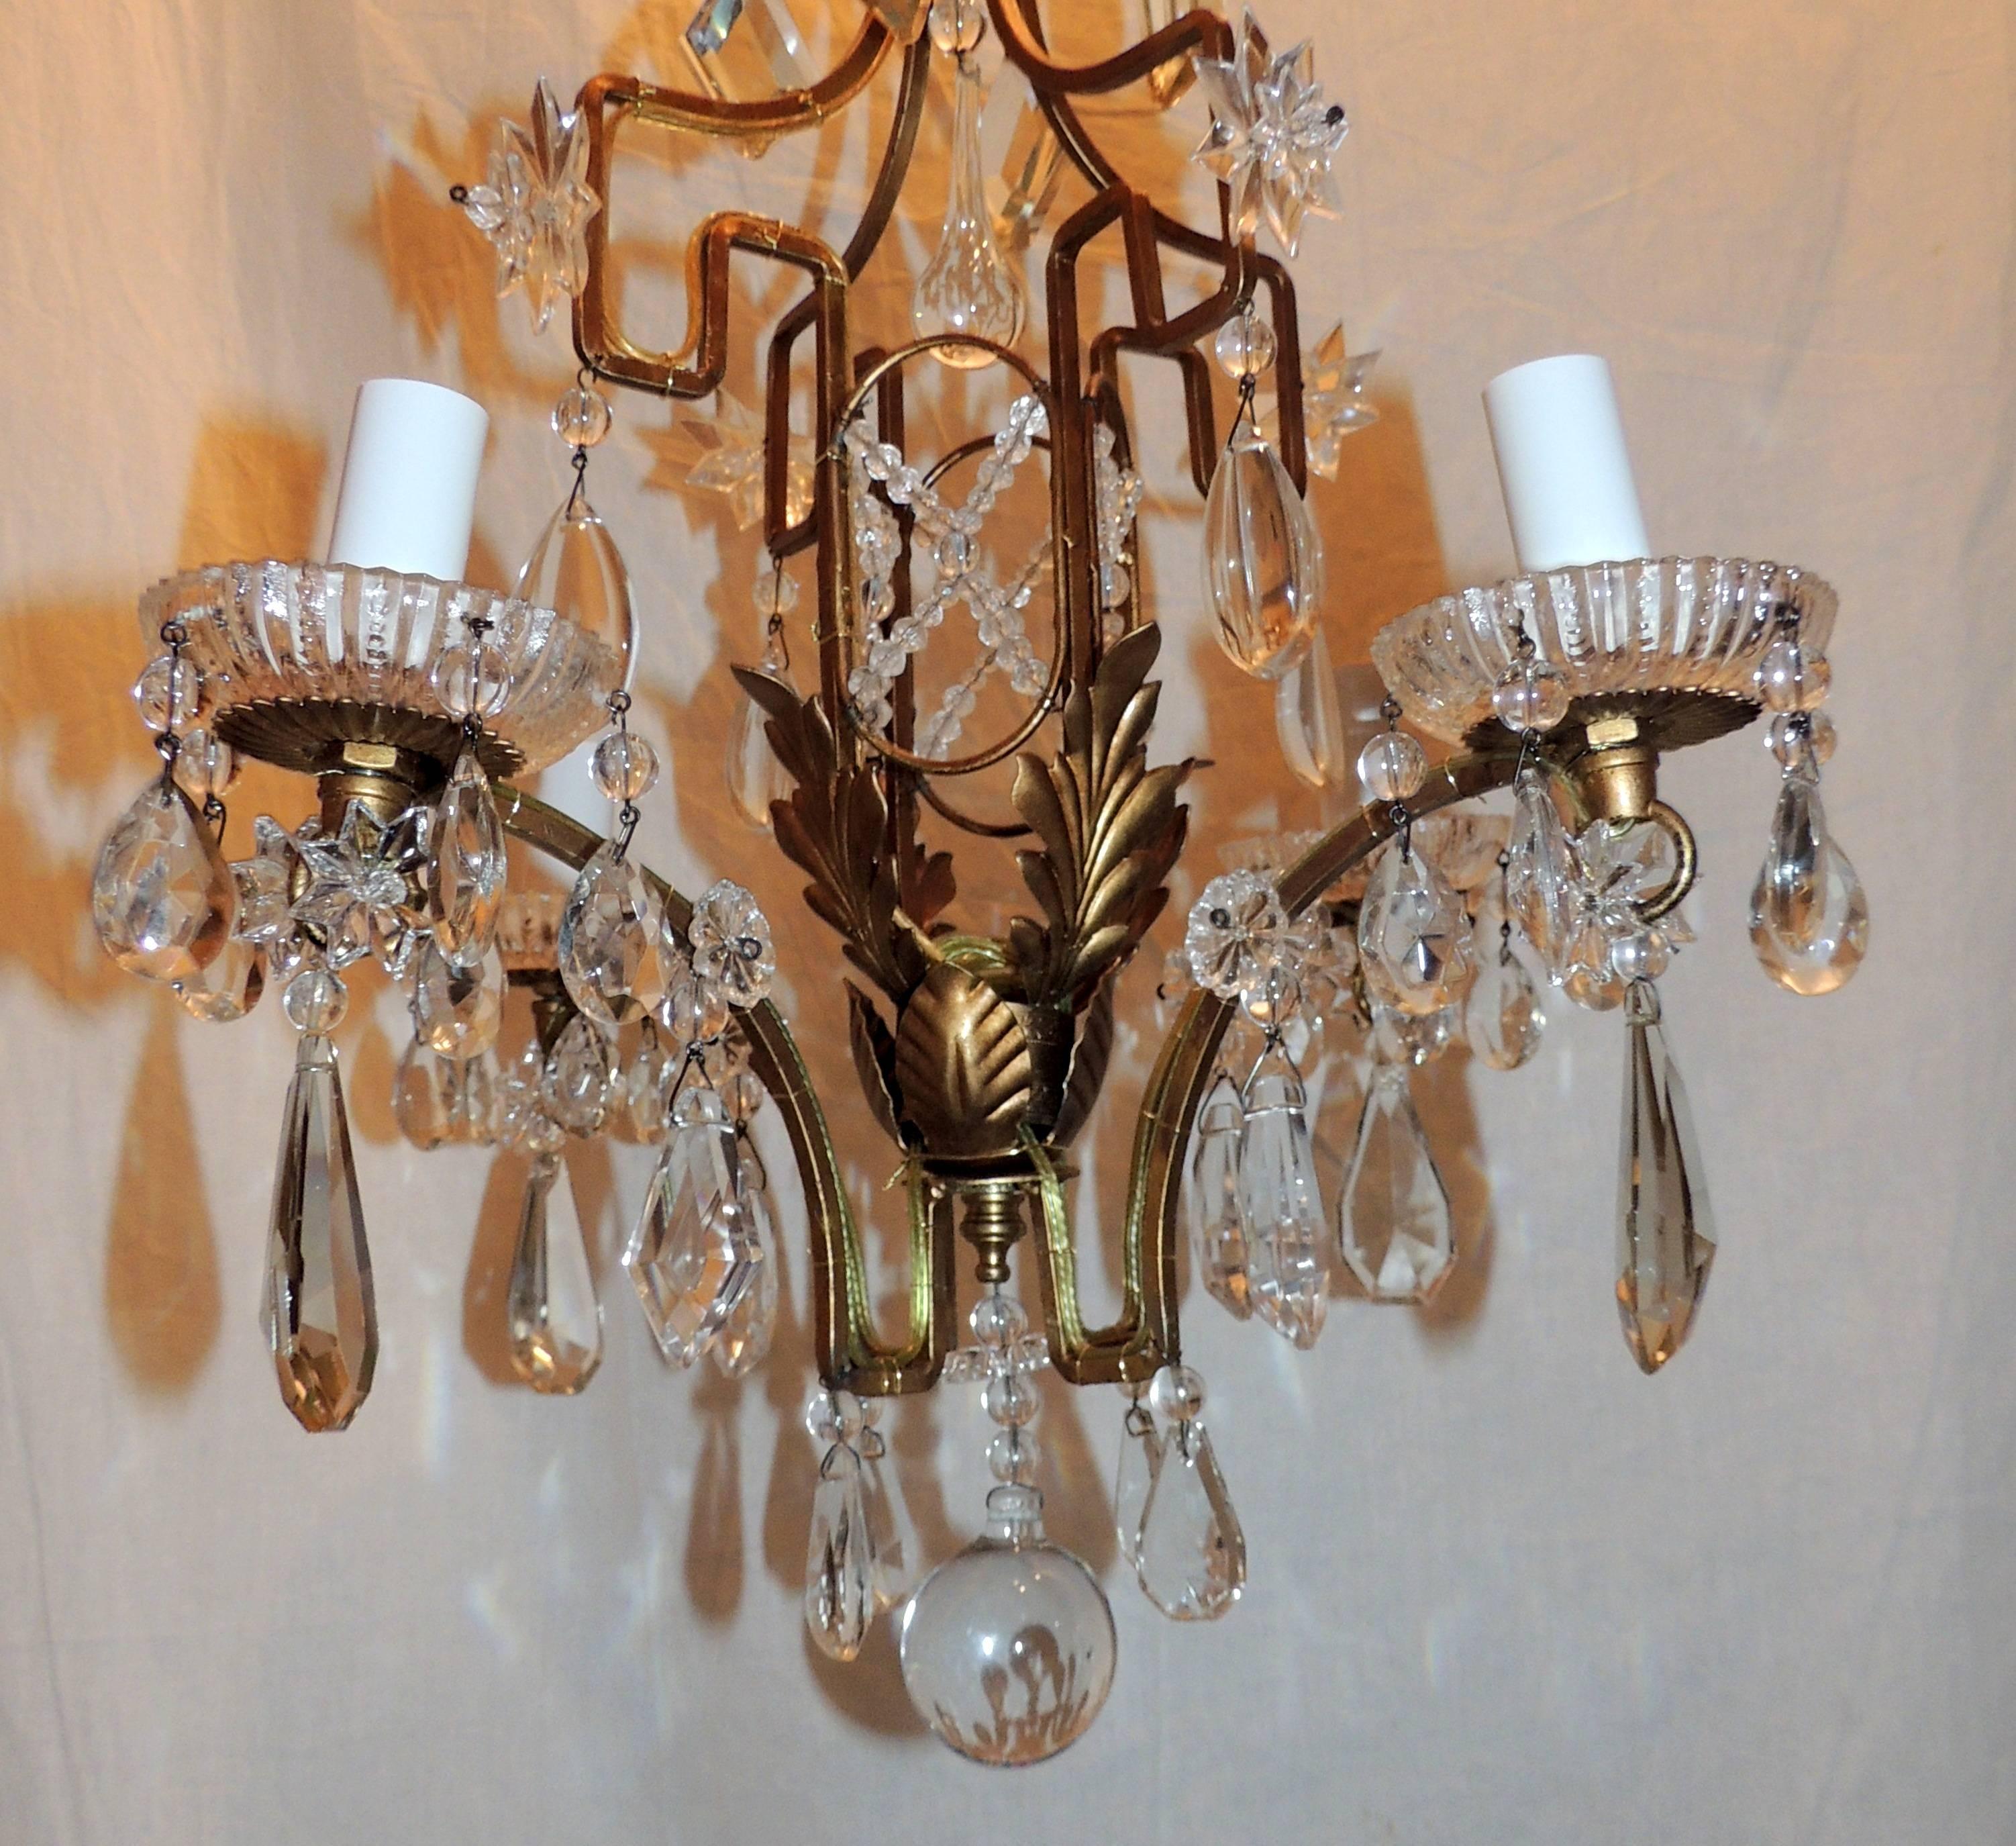 Wonderful Bagues French Gilt Crystal Beaded Petite Chandelier Four-Light Fixture In Good Condition For Sale In Roslyn, NY